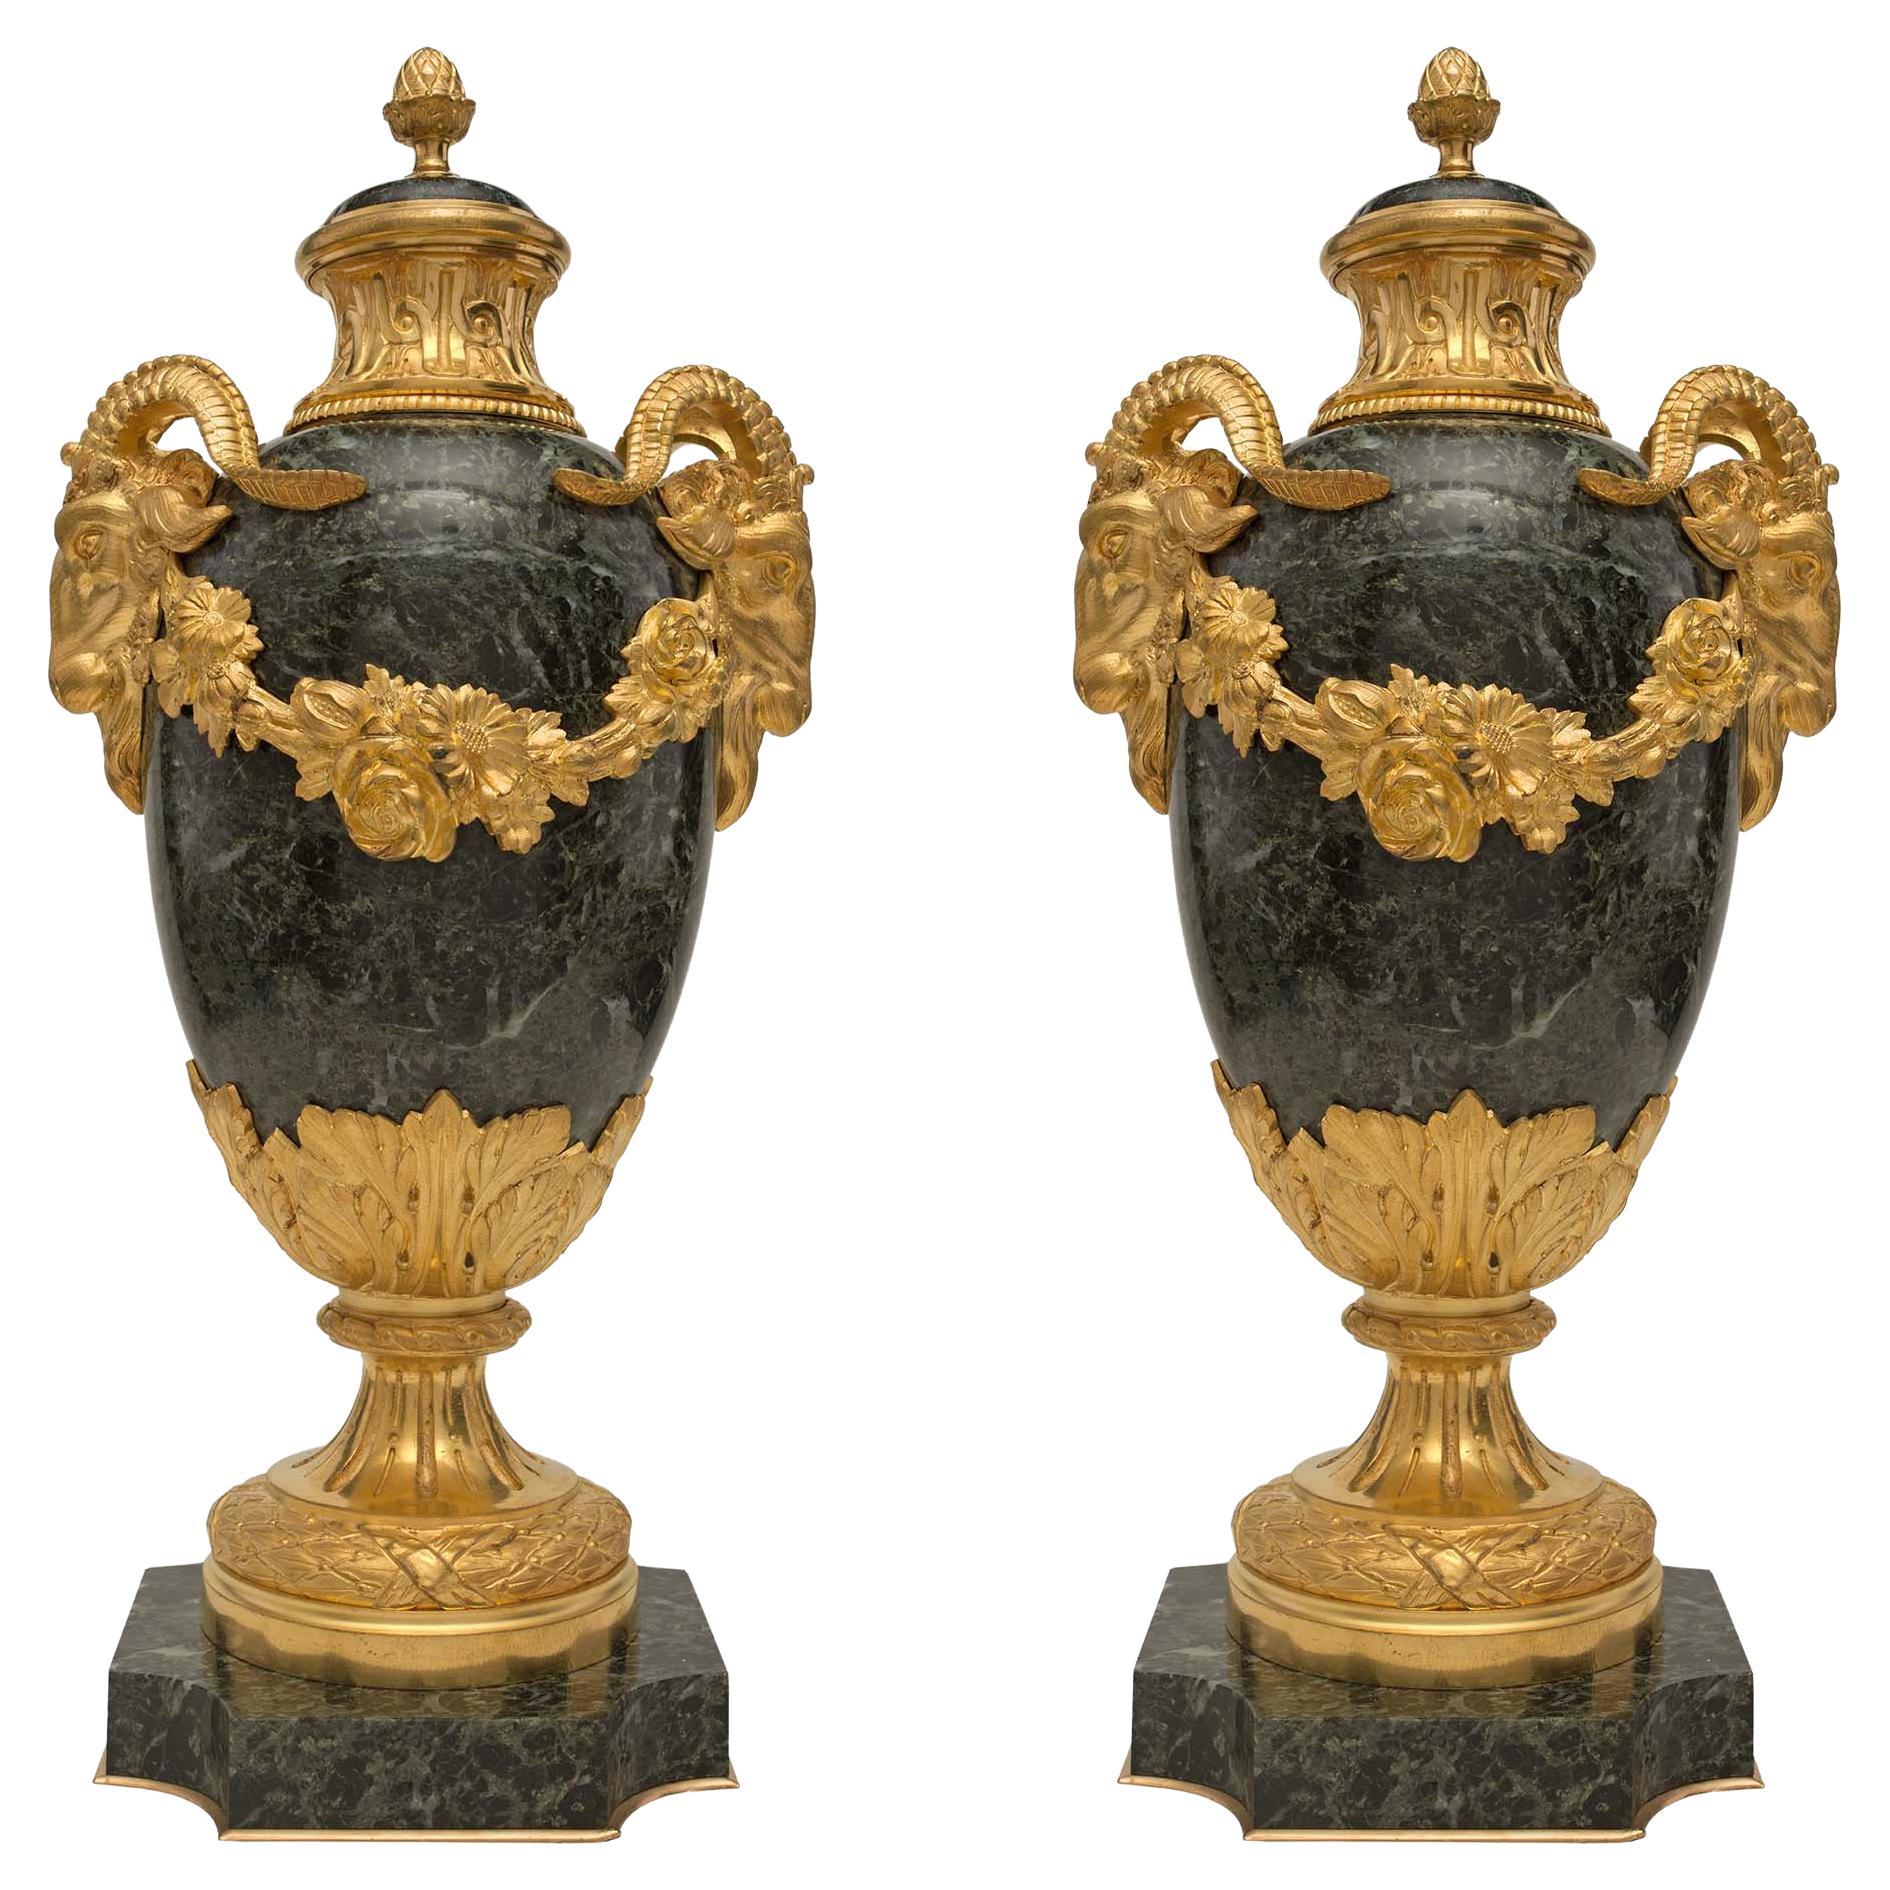 Pair of French 19th Century Louis XVI Style Vert Antique Lidded Marble Urns For Sale